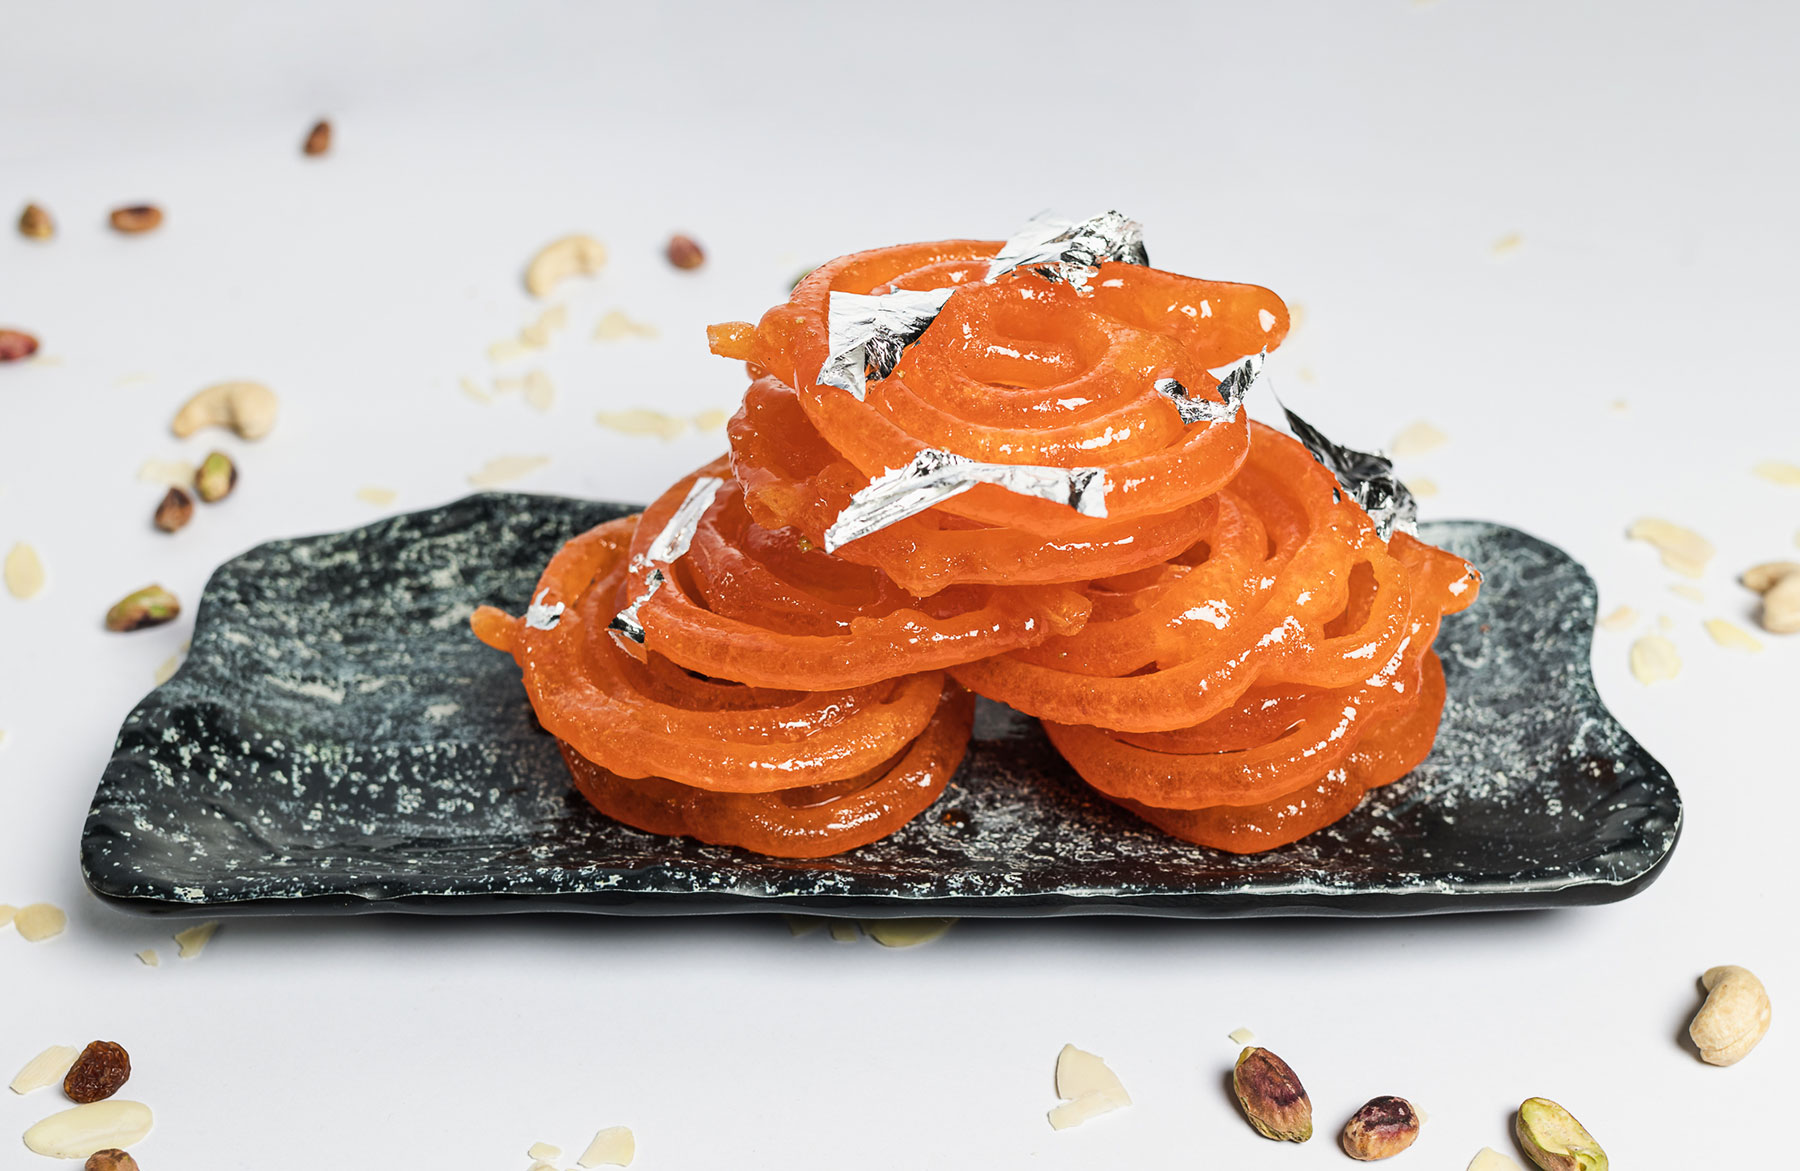 Delicious Bellam Jalebi from Swagath Foods Sydney - A sweet Indian dessert with syrupy goodness.